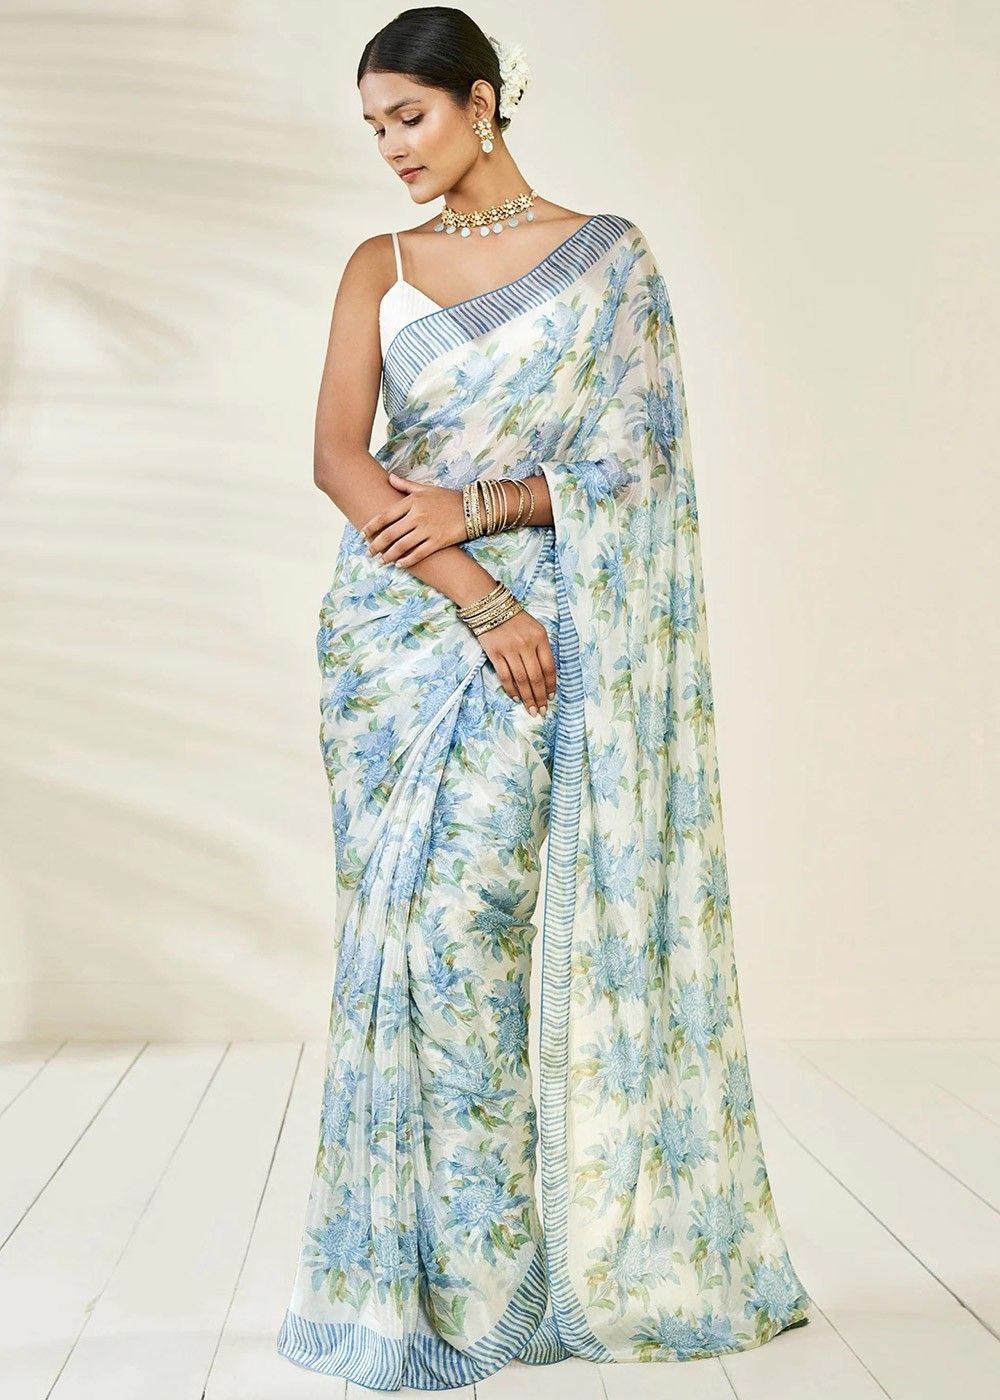 White Floral Printed Party Wear Saree In Chiffon 4564SR09